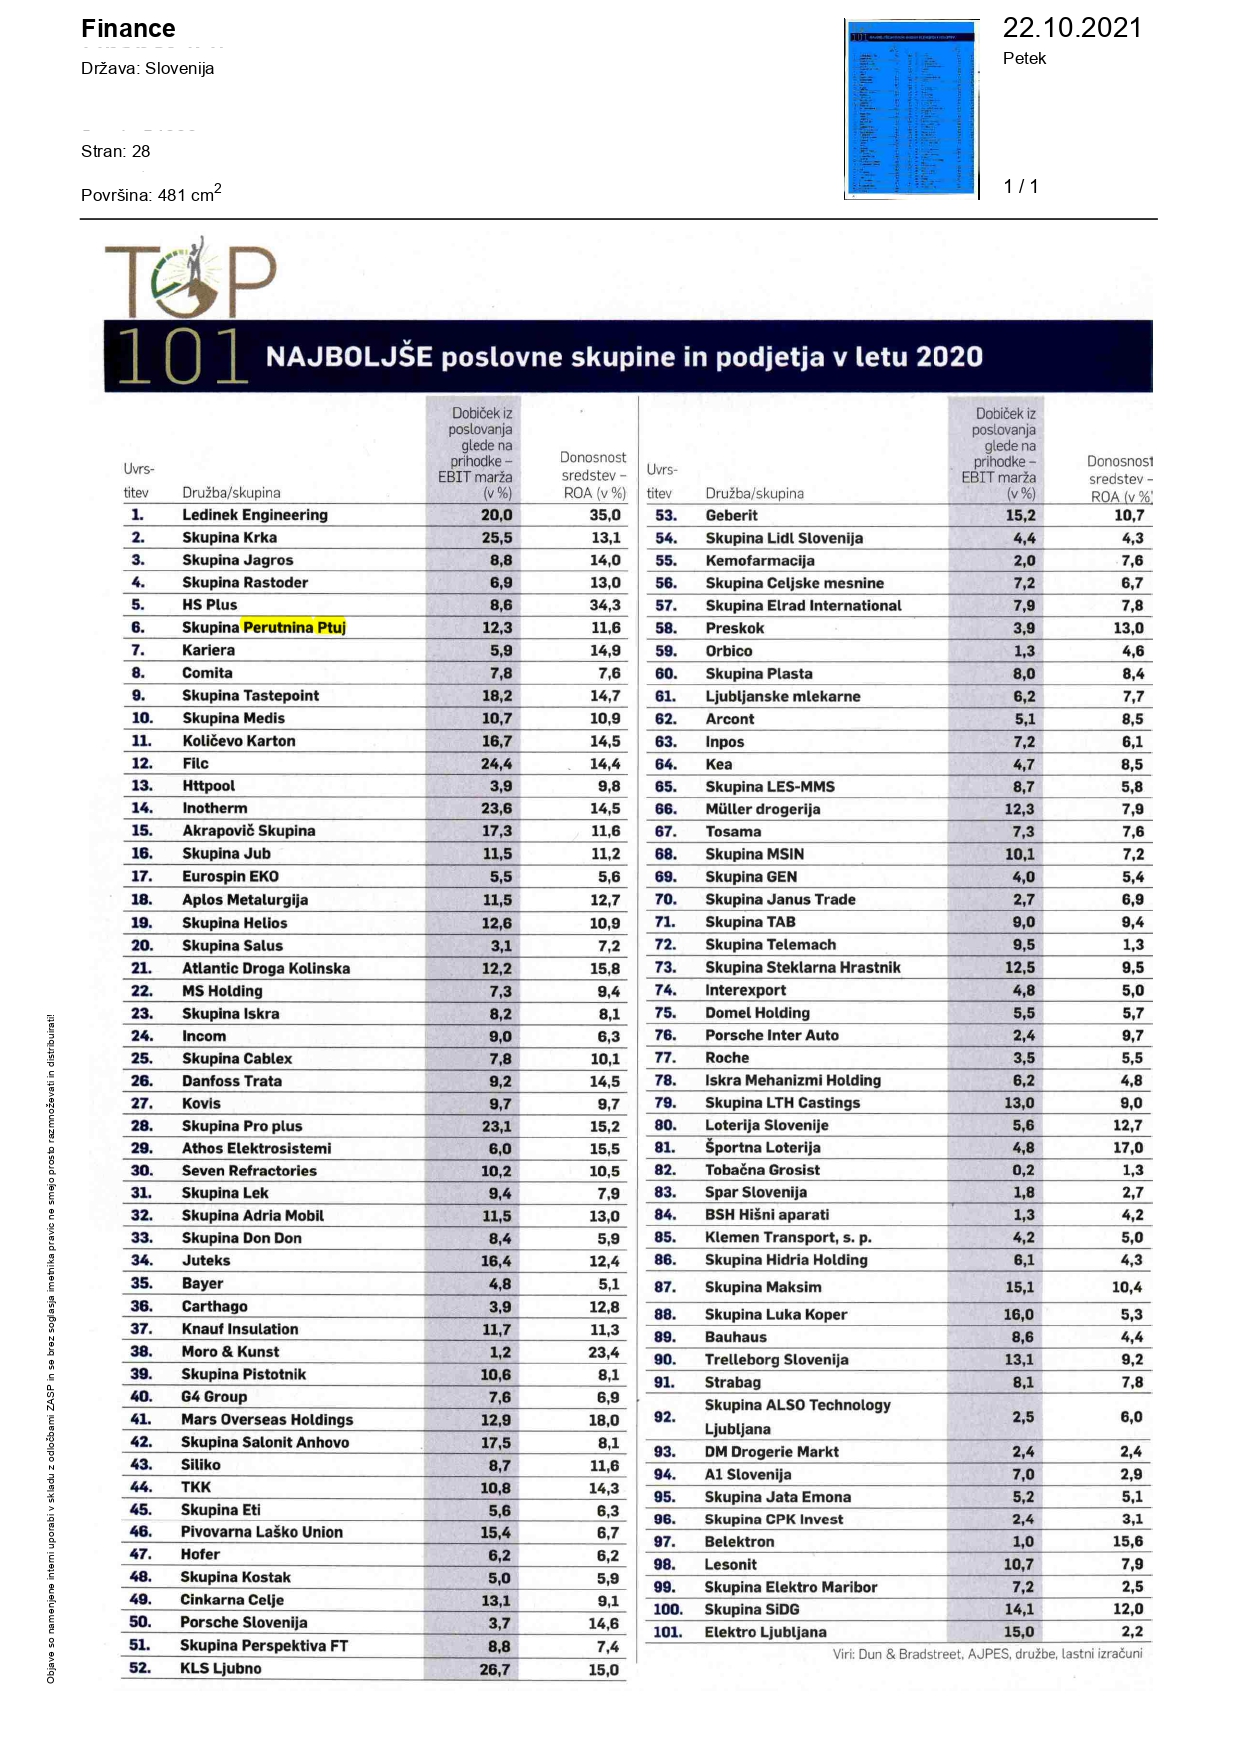 MHP's Perutnina Ptuj is ranked among the largest companies in Slovenia